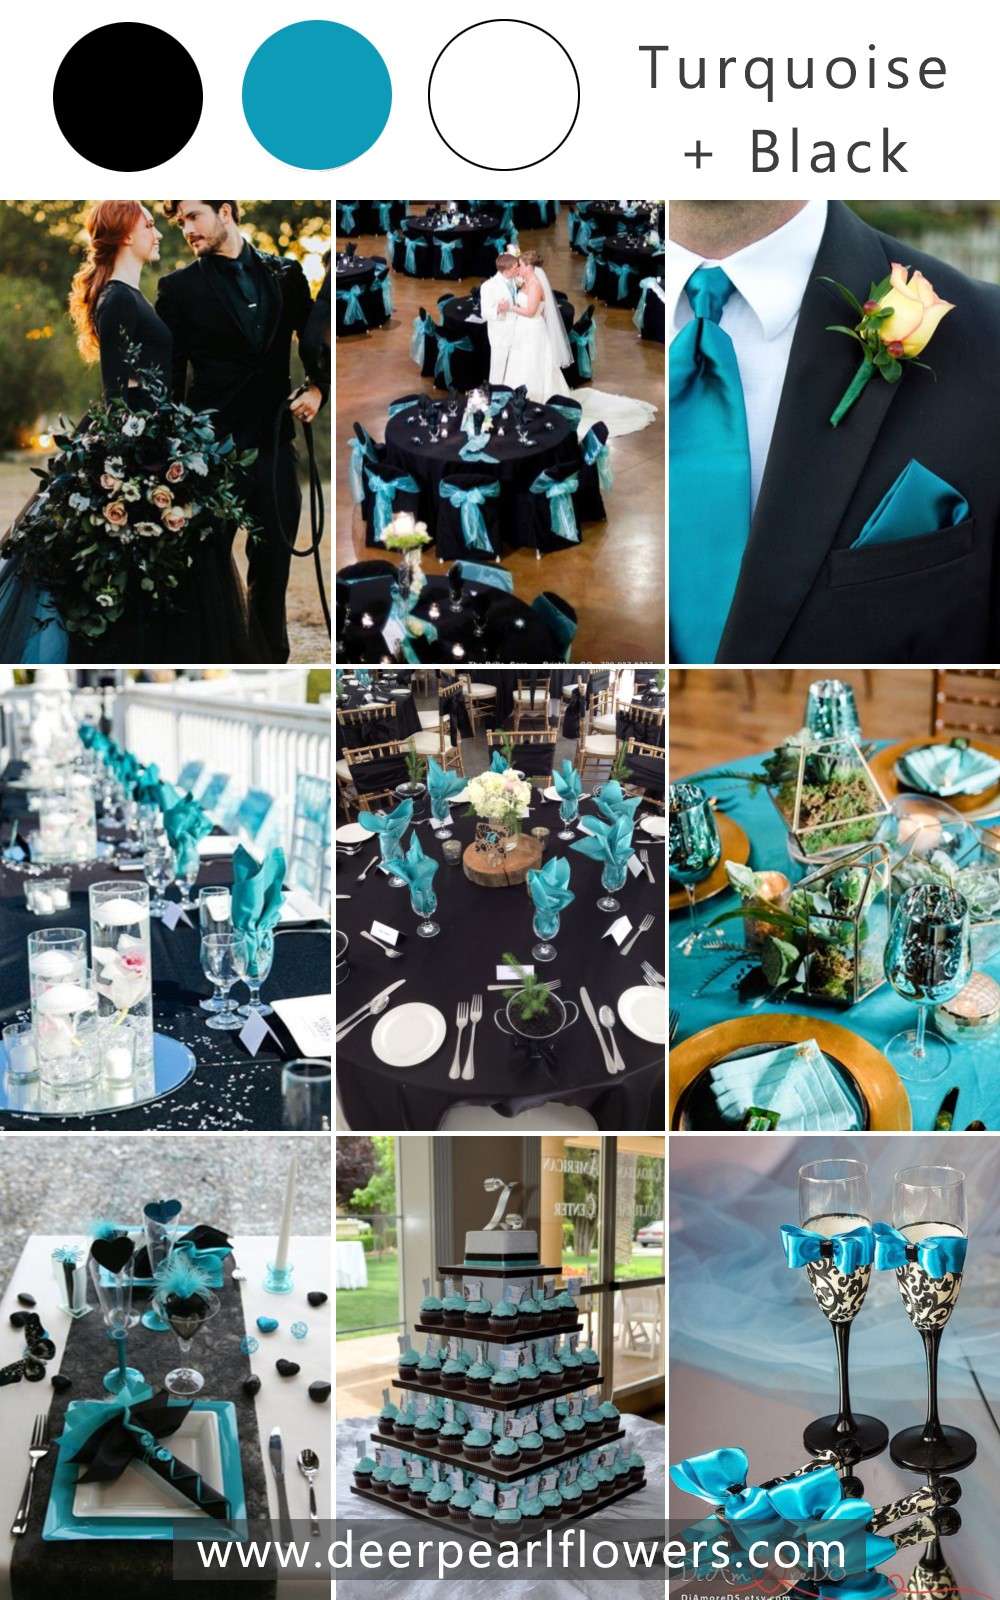 Black and turquoise wedding theme color idea